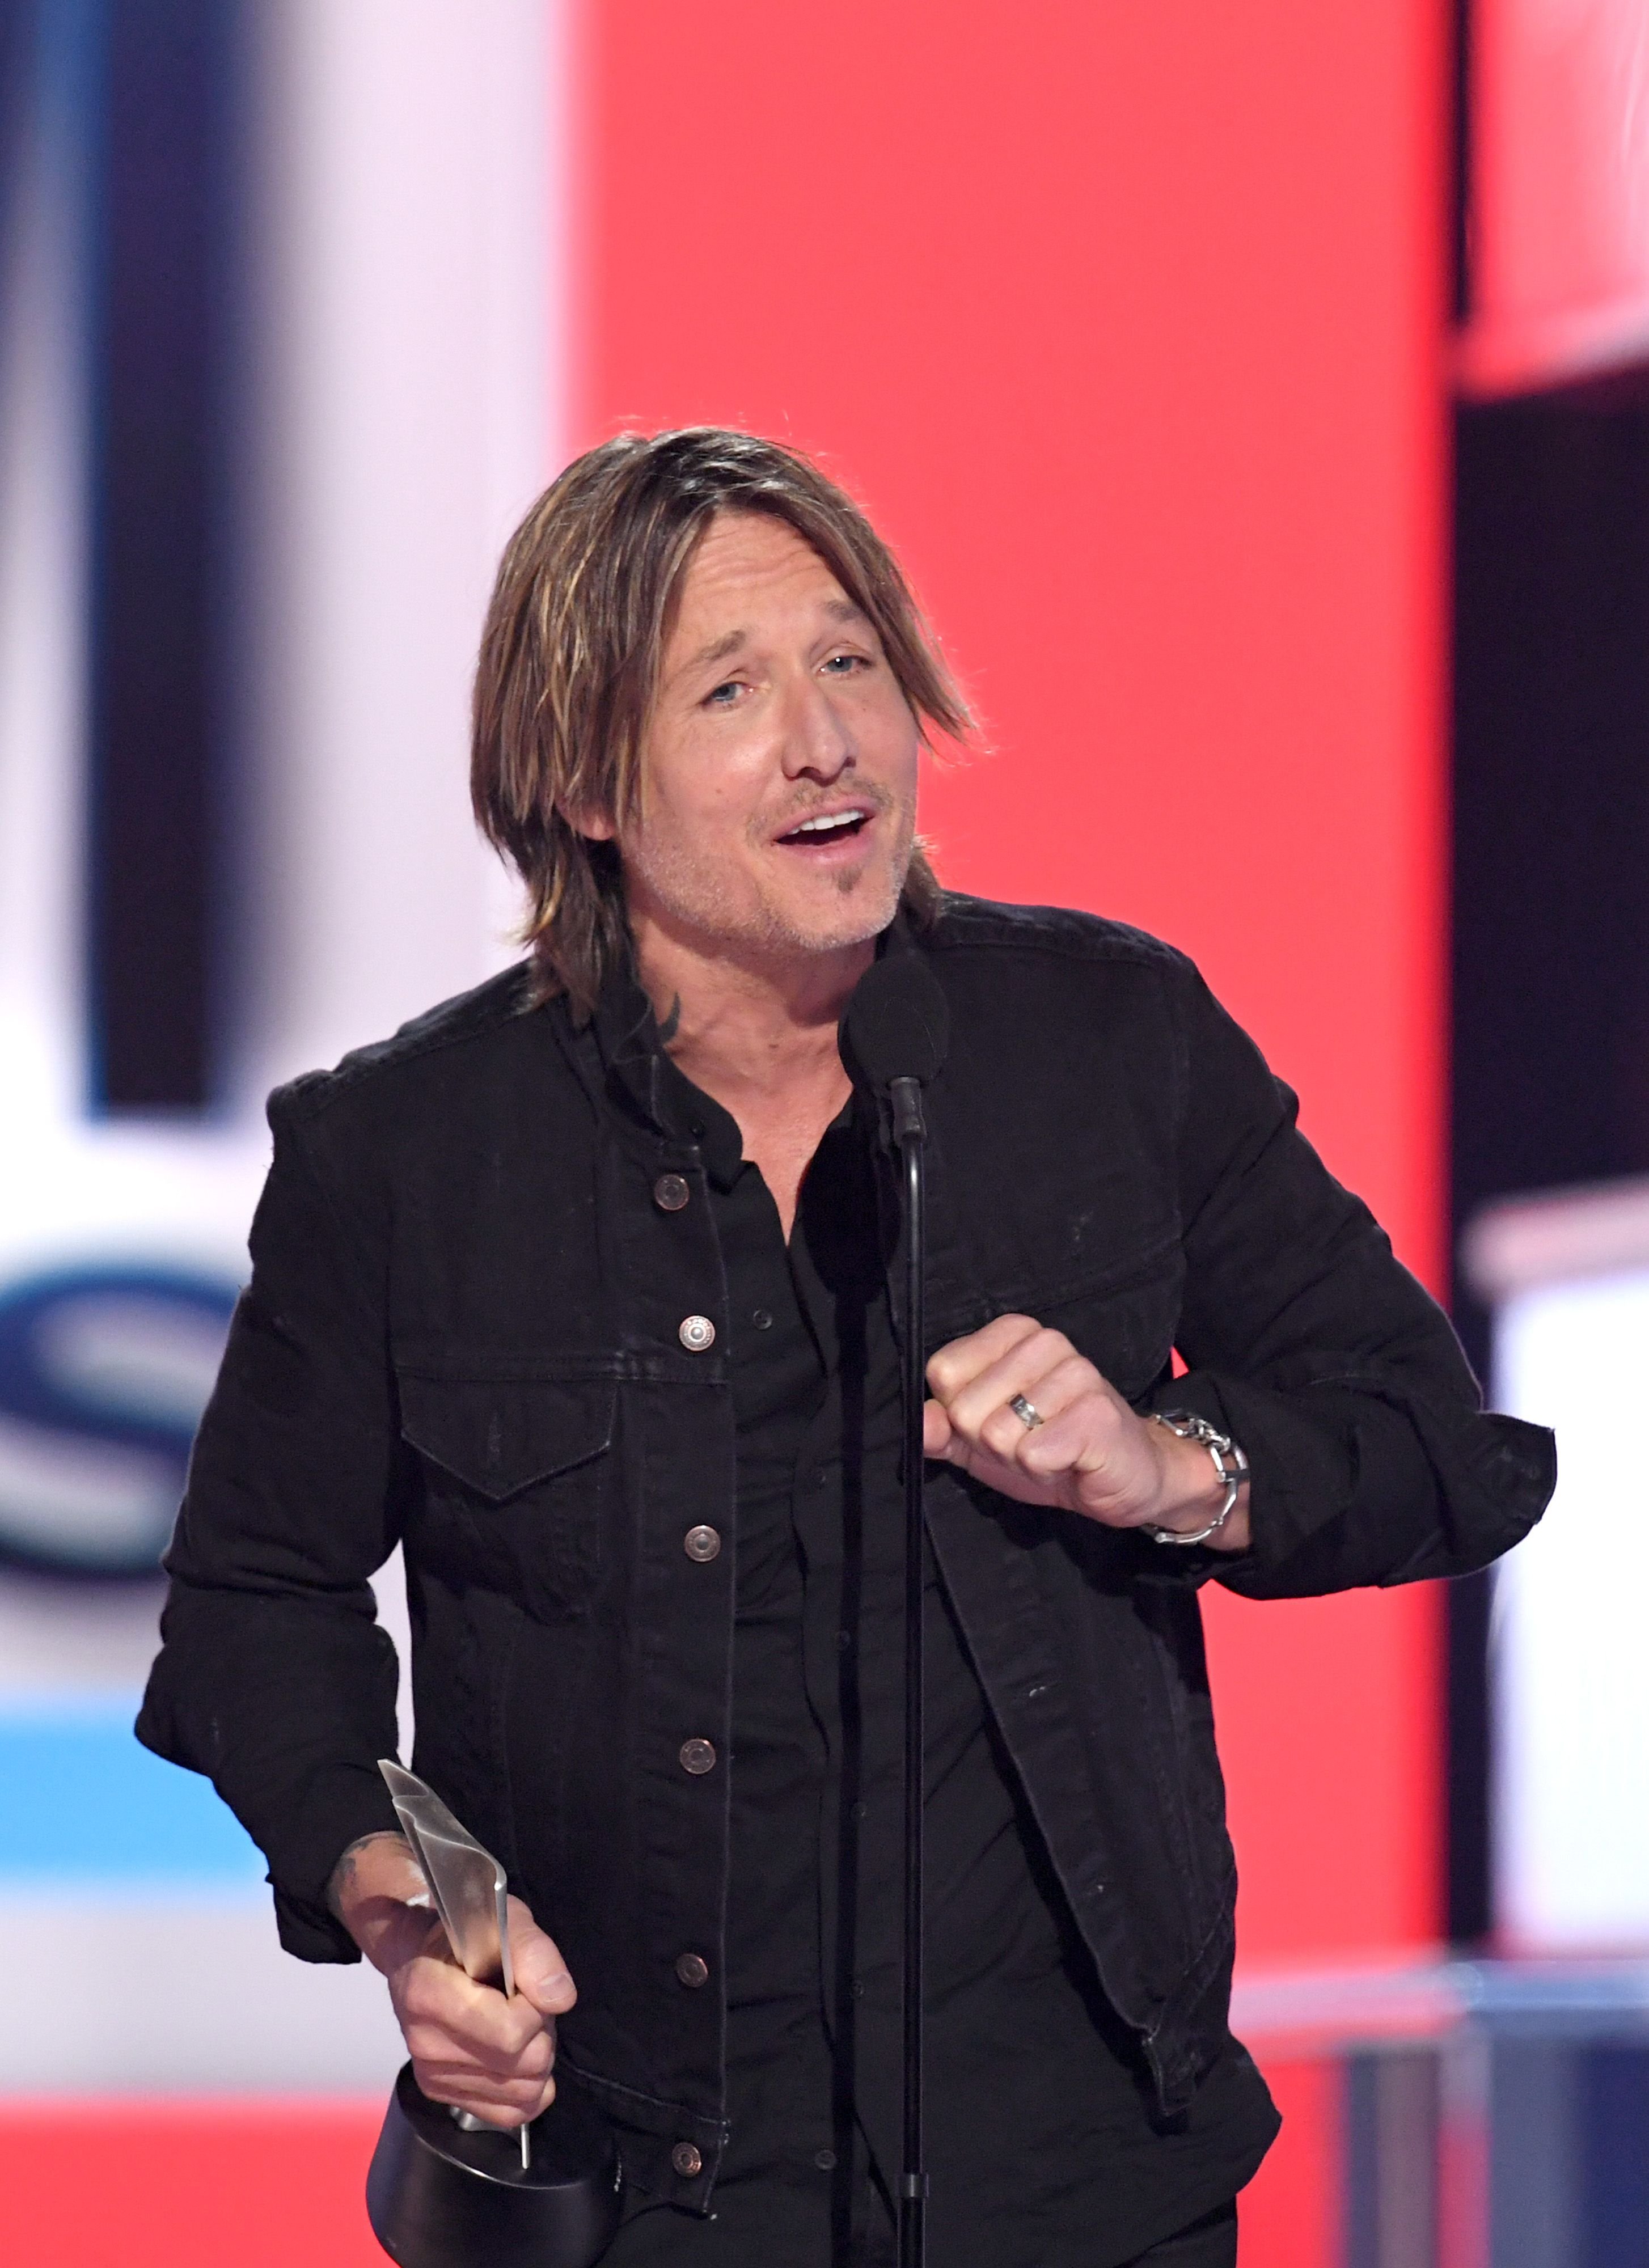 Keith Urban accepting the "Entertainer of the Year" award at the 54th Academy Of Country Music Awards in Las Vegas on April 7, 2019 | Getty Images 